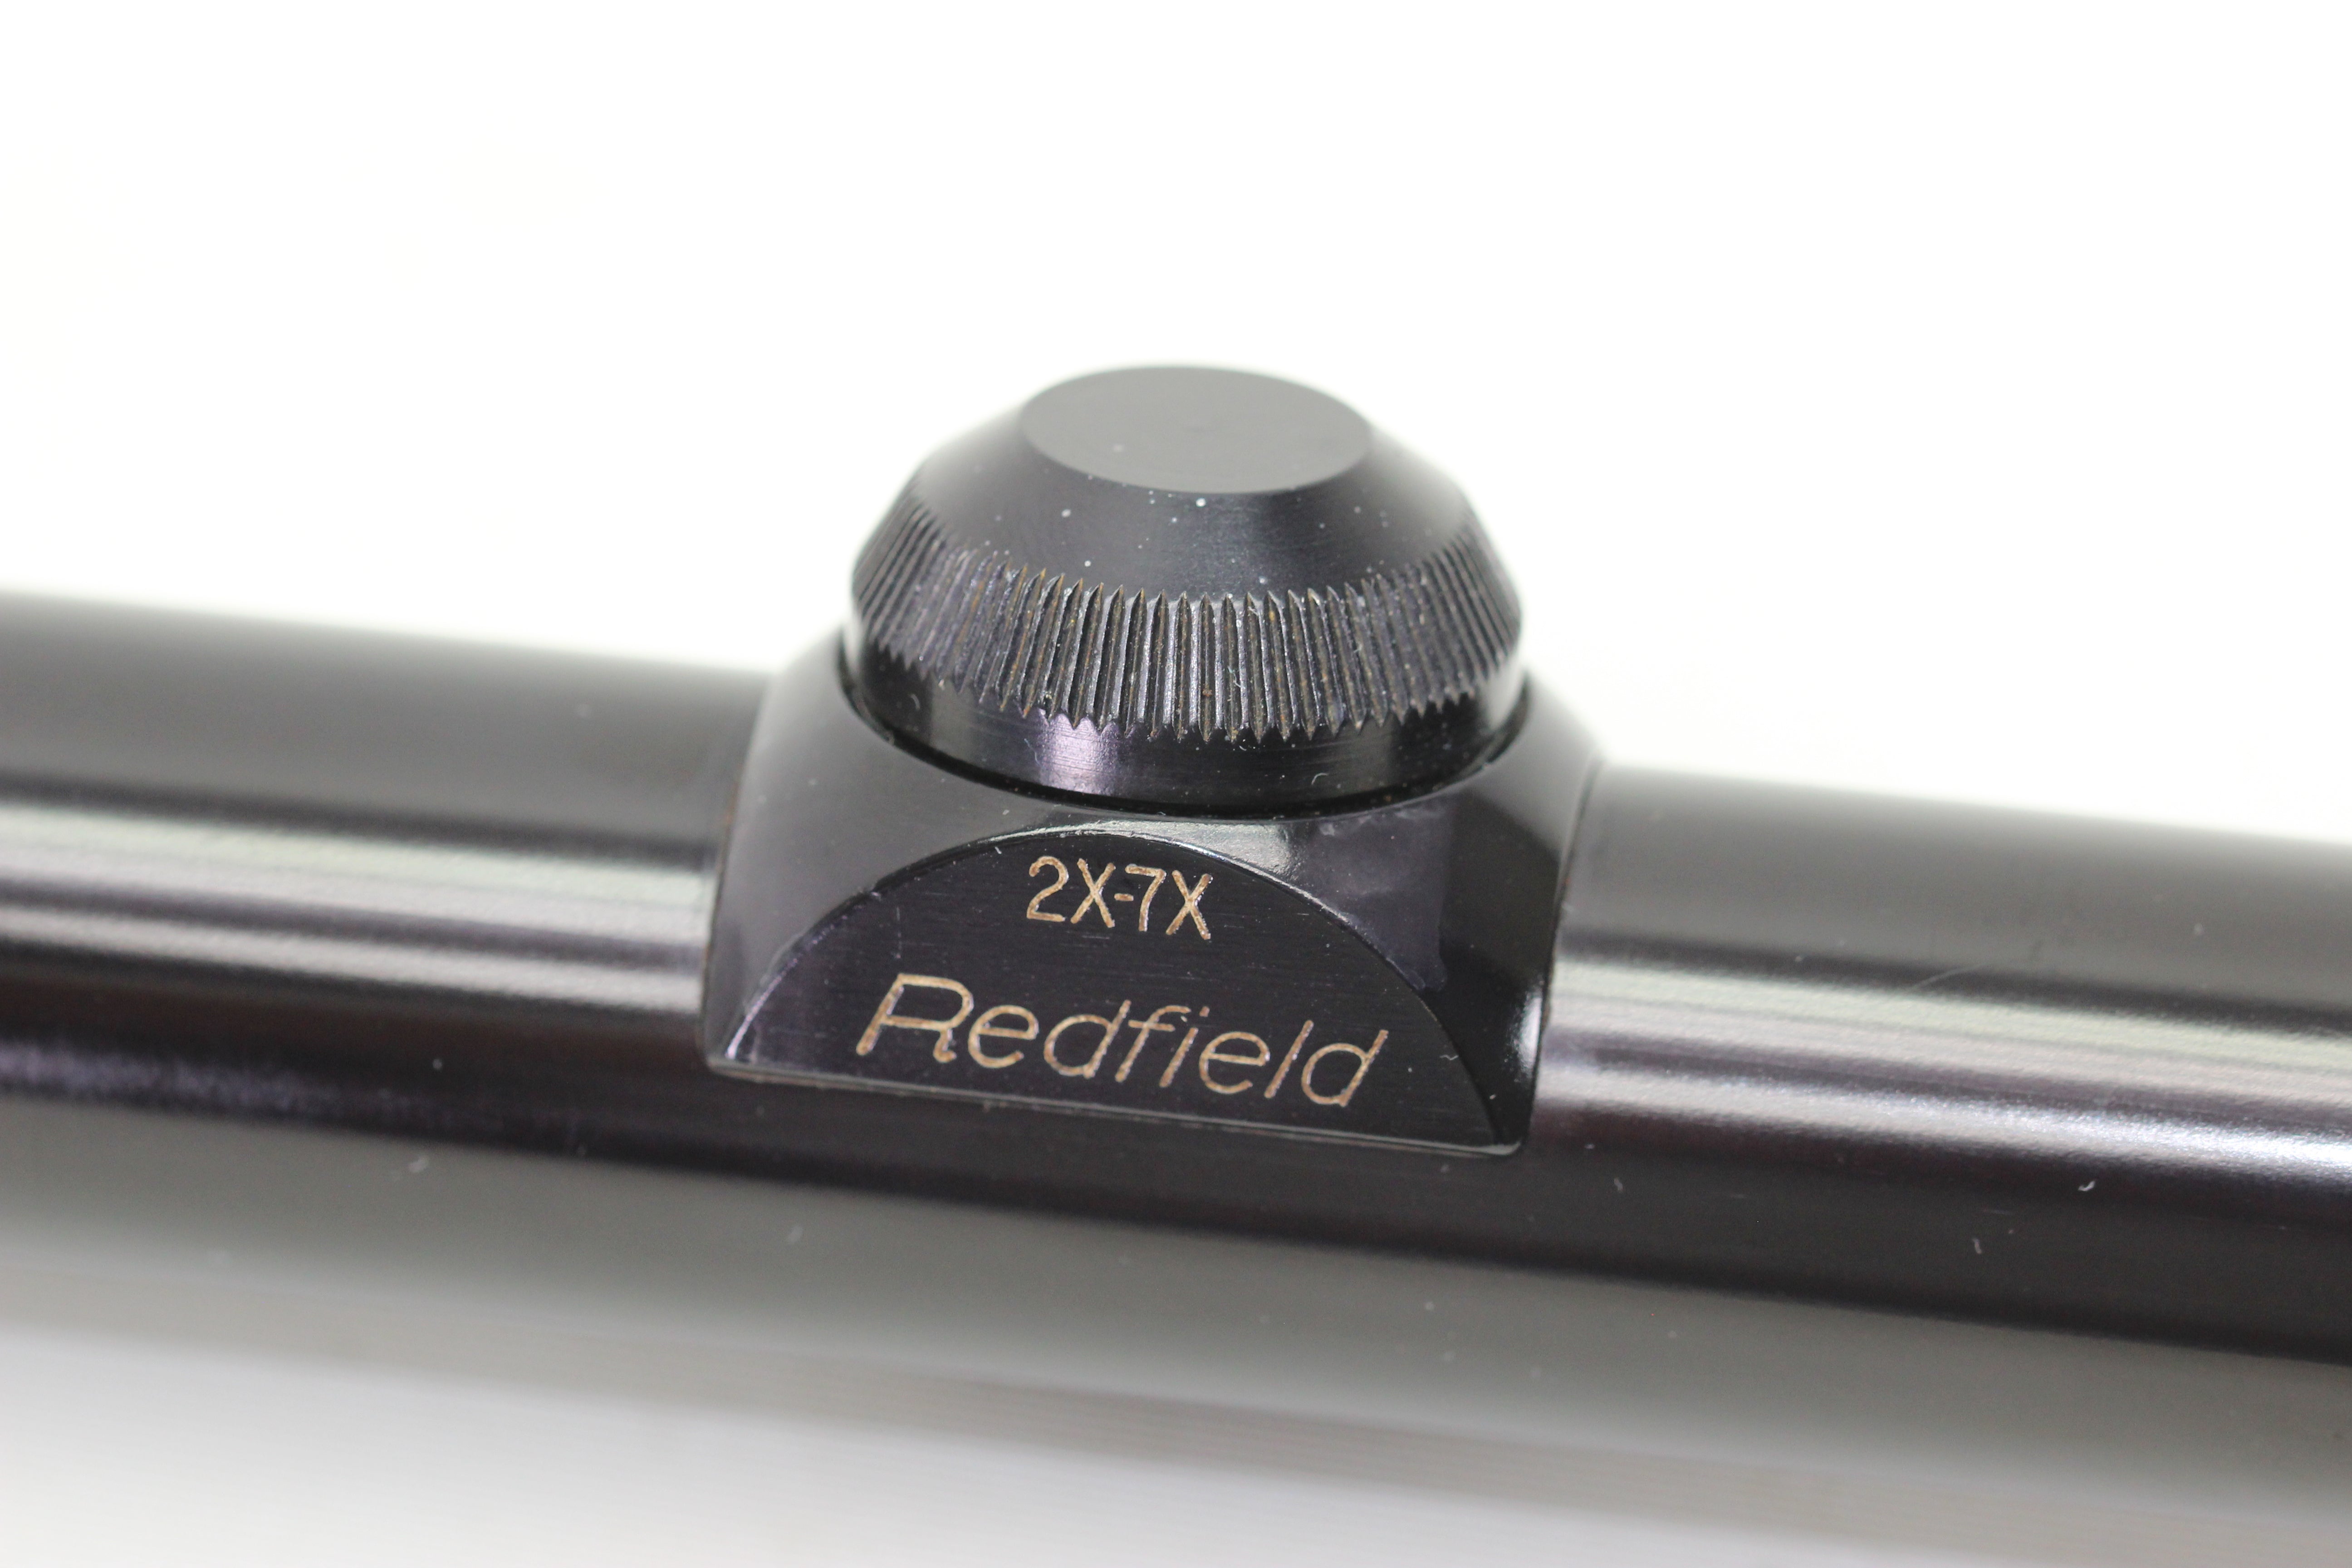 Redfield 2x-7x Scope - Special Reticle